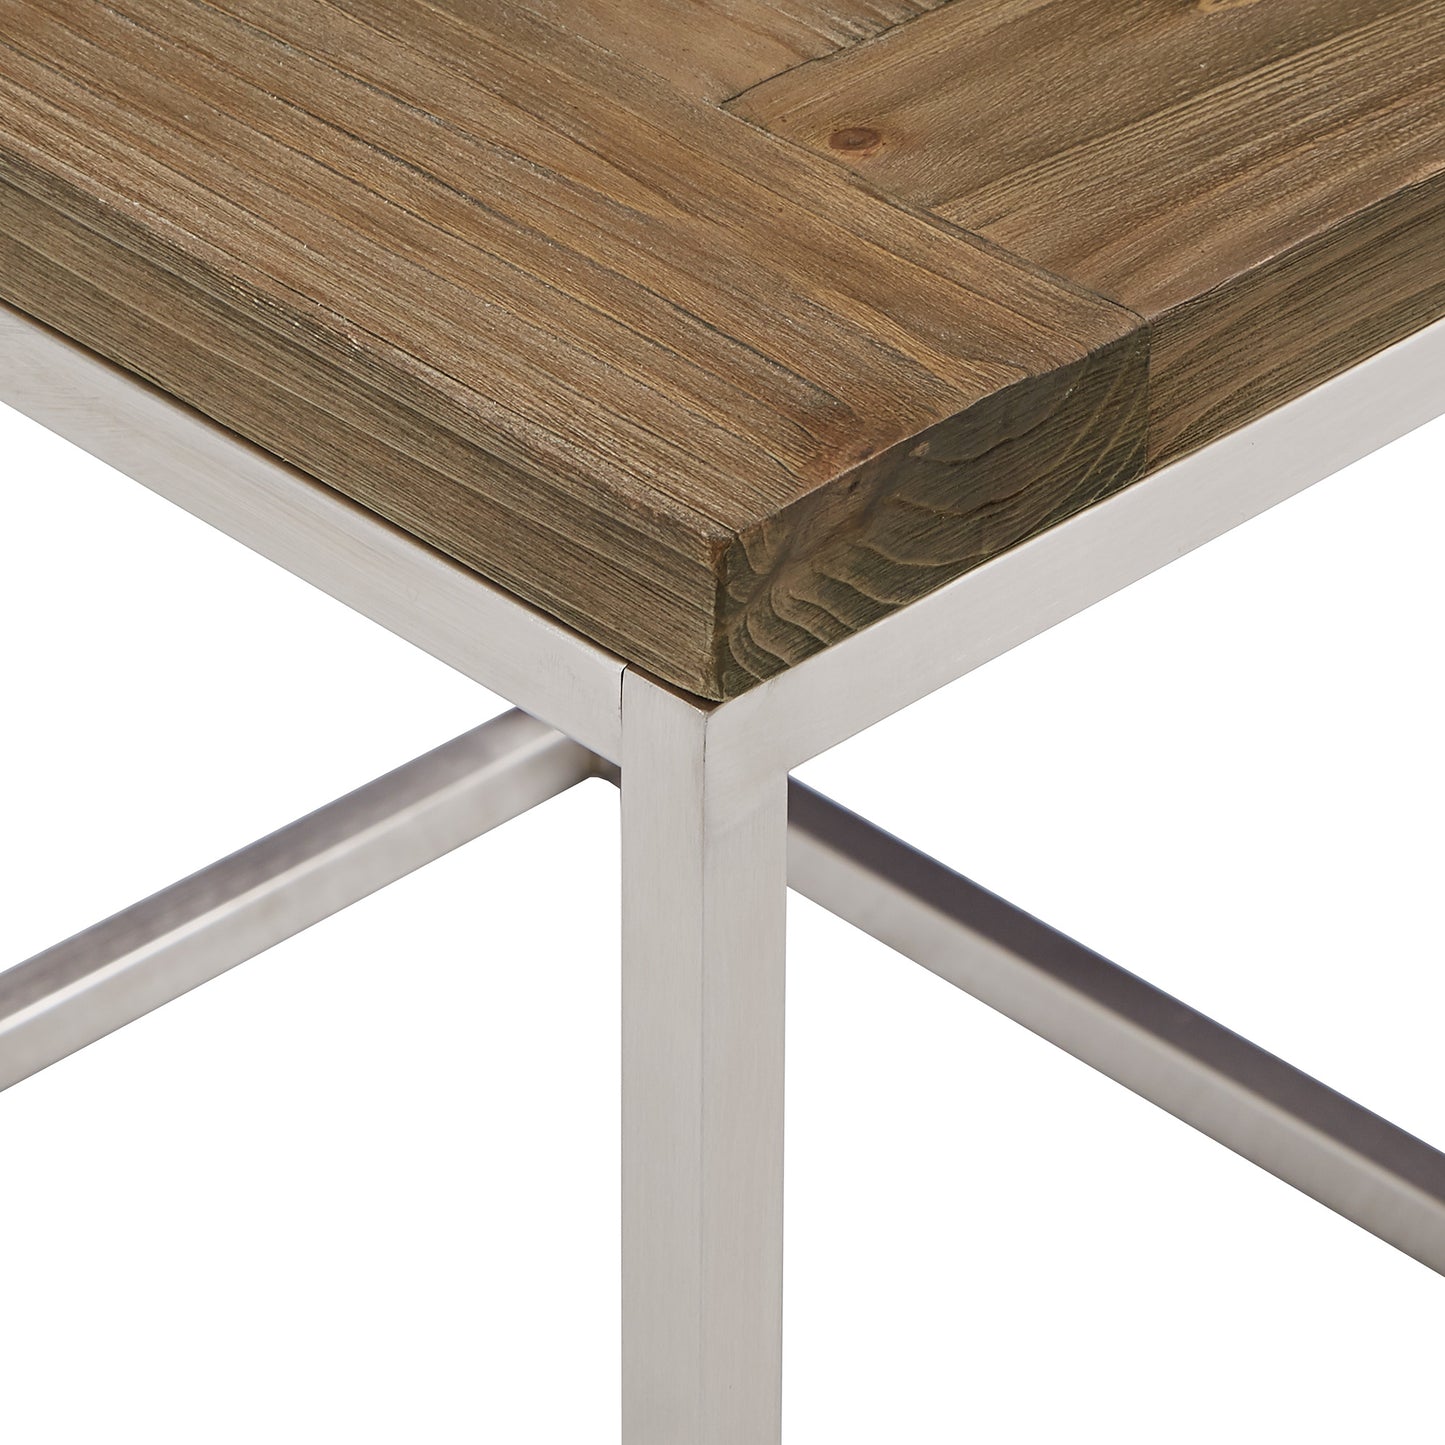 Stainless Steel Rectangular End Table - Light Pine Finish Top